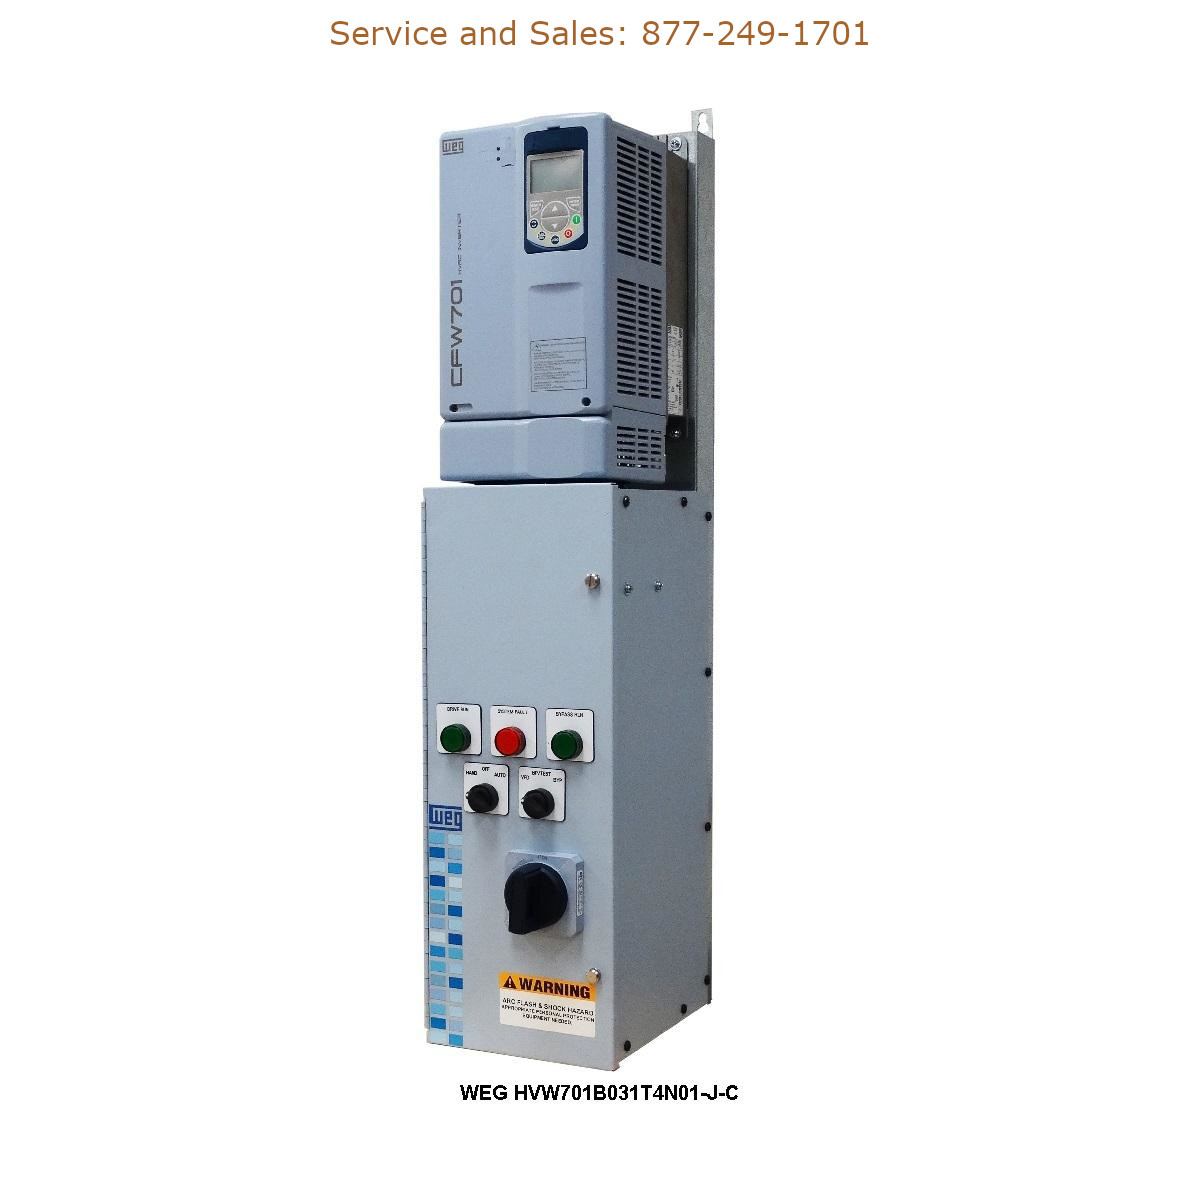 WEG HVW701B031T4N01-J-C WEG Model Number HVW701B031T4N01-J-C WEG Drives, Variable Speed Drives Repair Service, Troubleshooting, Replacement Parts https://gesrepair.com/wp-content/uploads/2022/WEG/WEG_HVW701B031T4N01-J-C_Drives_Variable_Speed_Drives.jpg